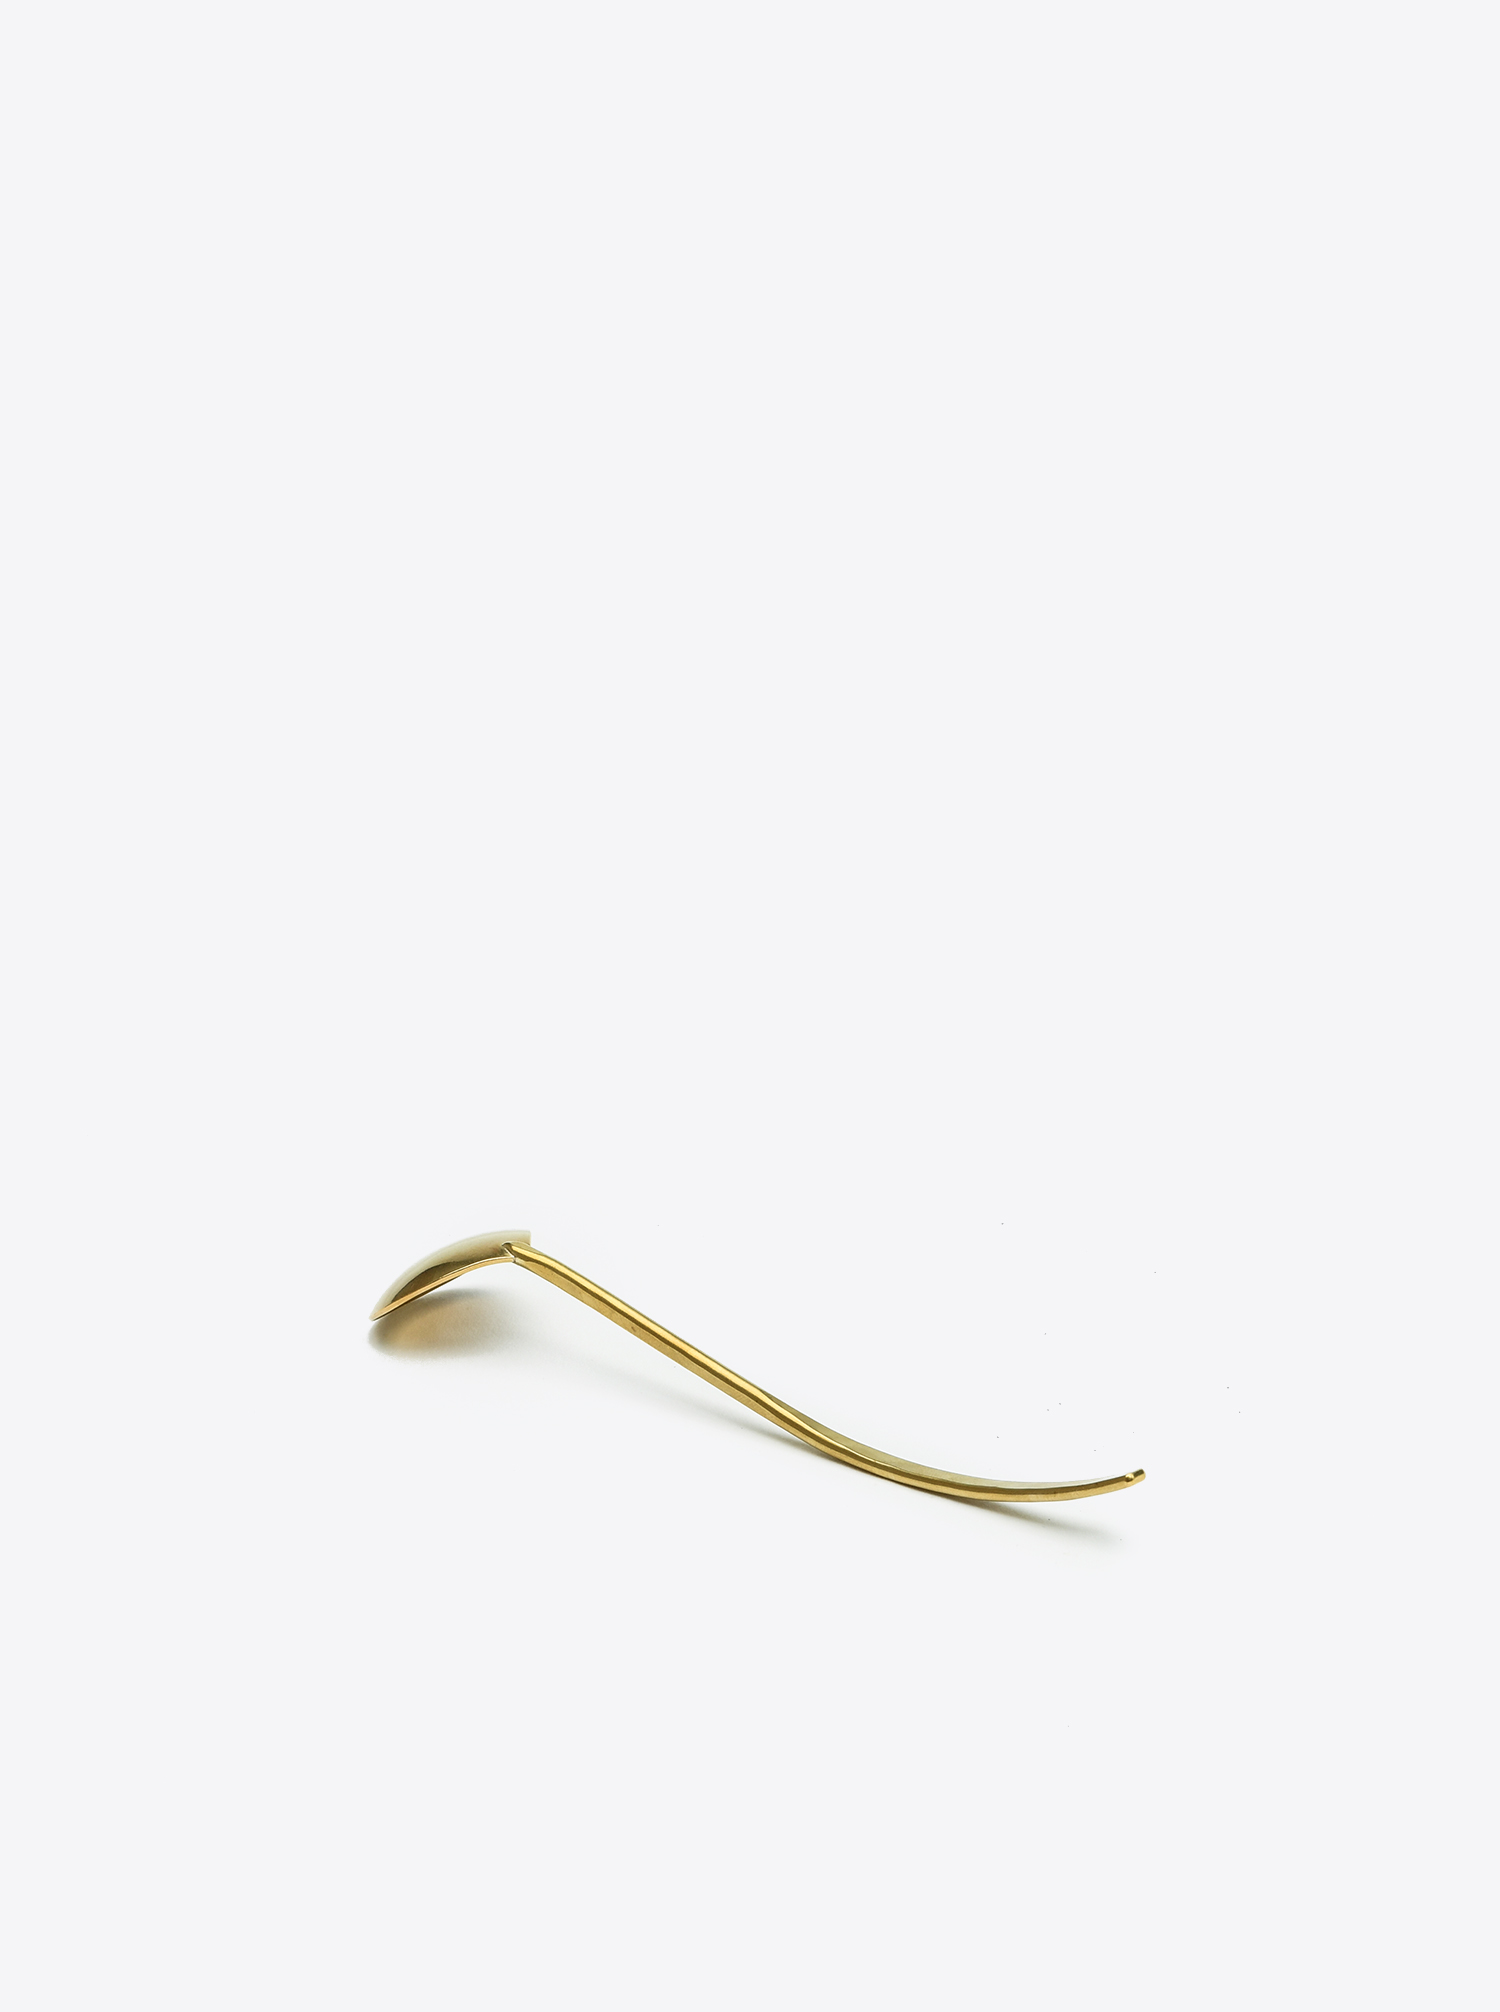 Spoon curved Brass